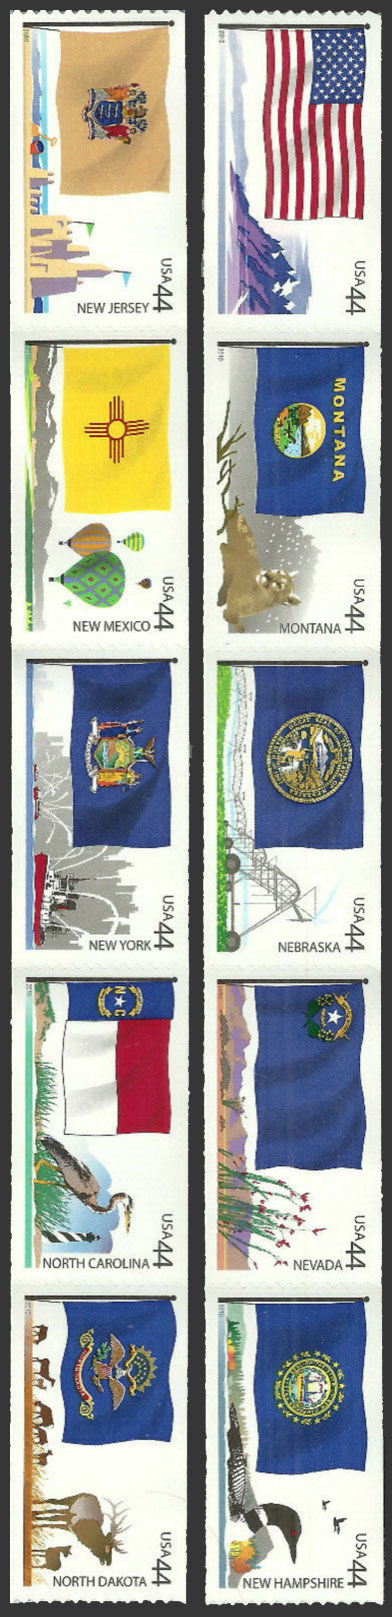 US 2010 Flags of Our Nation ; Se-tenant Coil 44c.x10 Scott 4312b